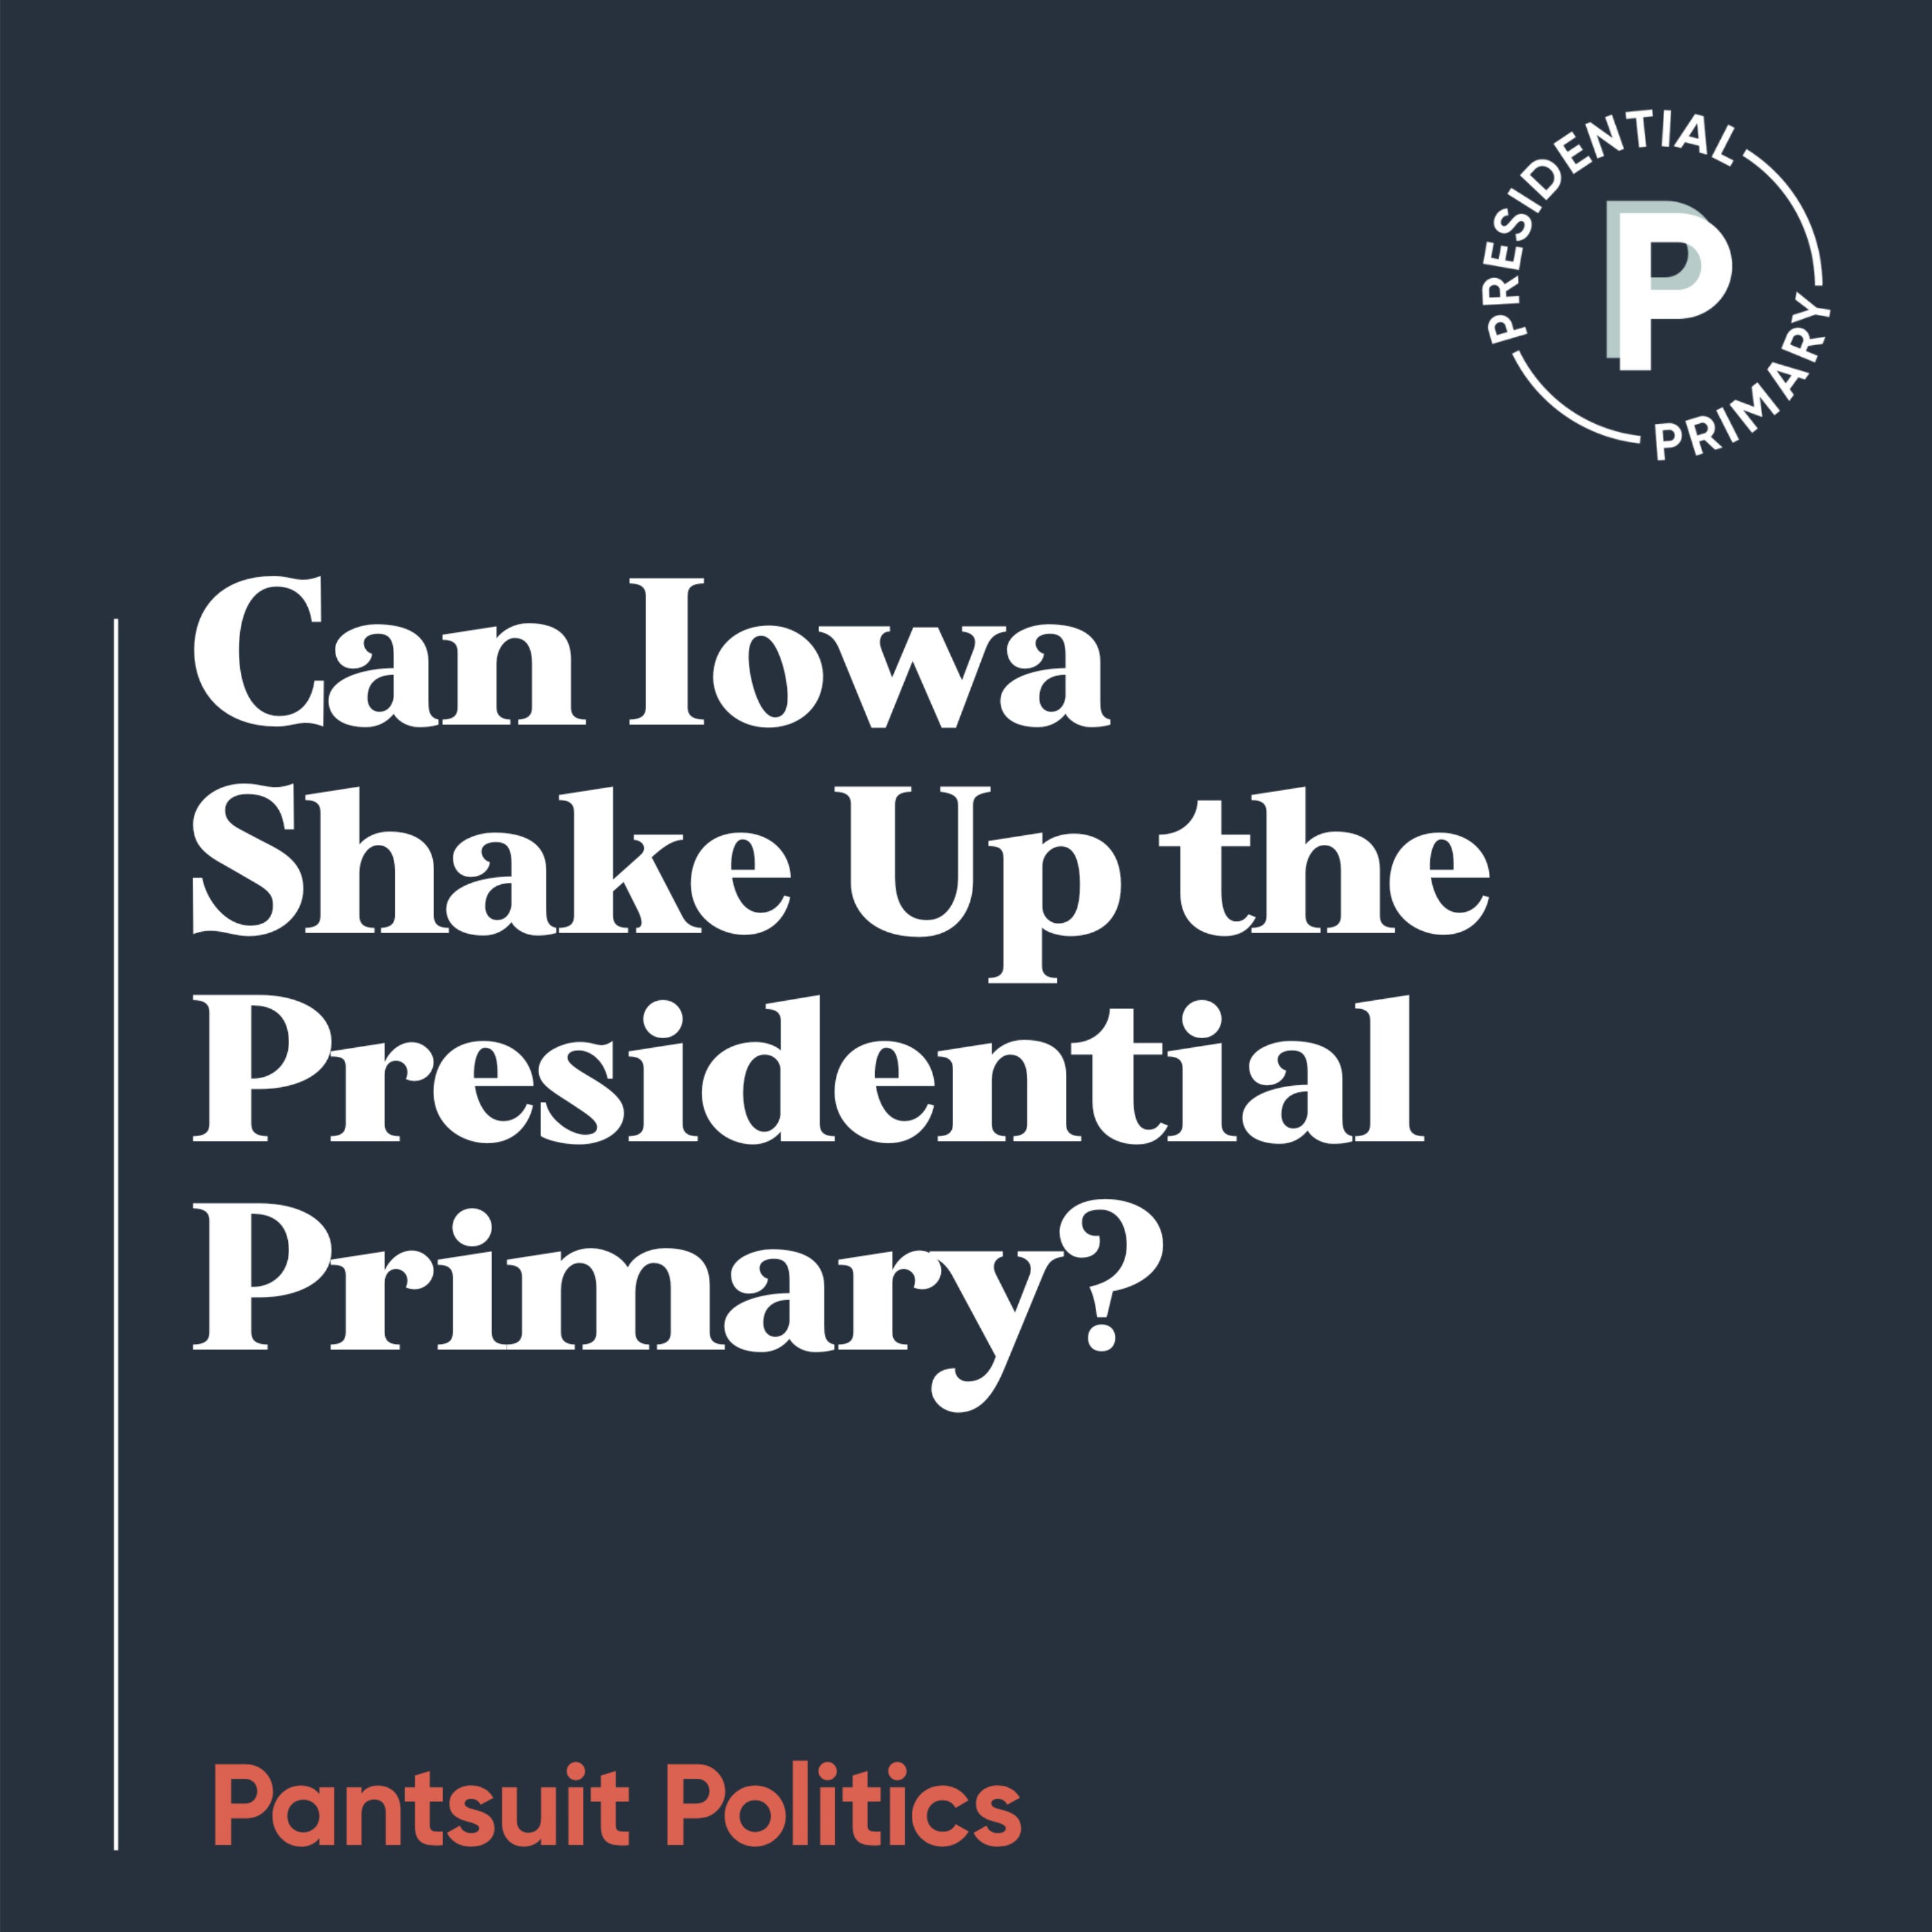 Can Iowa Shake Up the Presidential Primary?